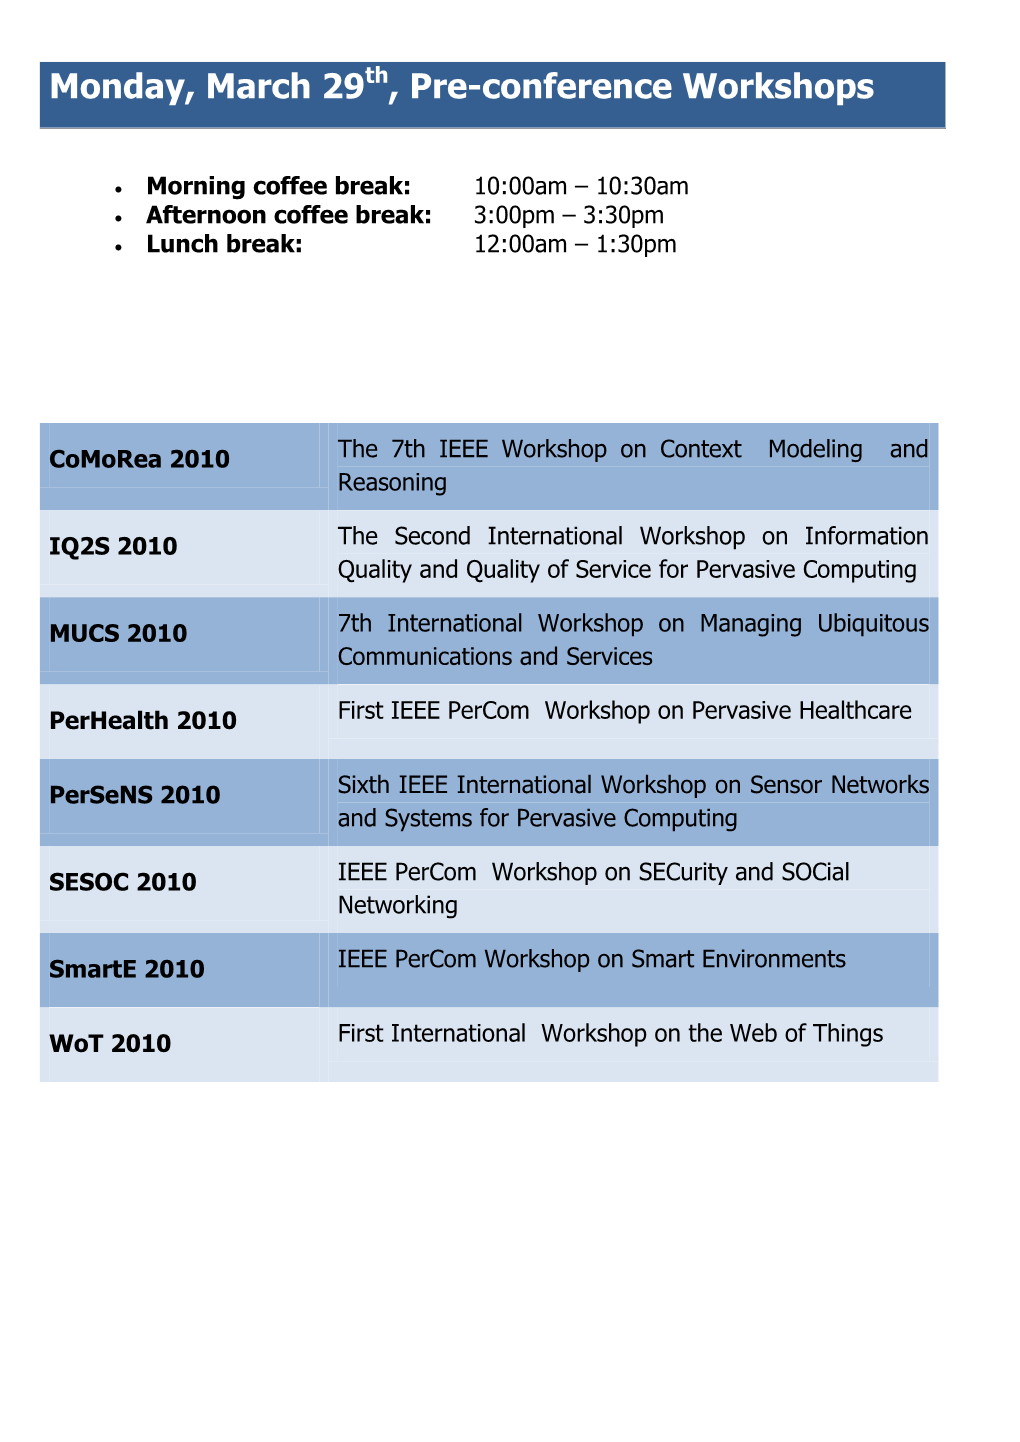 Monday, March 29Th, Pre-Conference Workshops